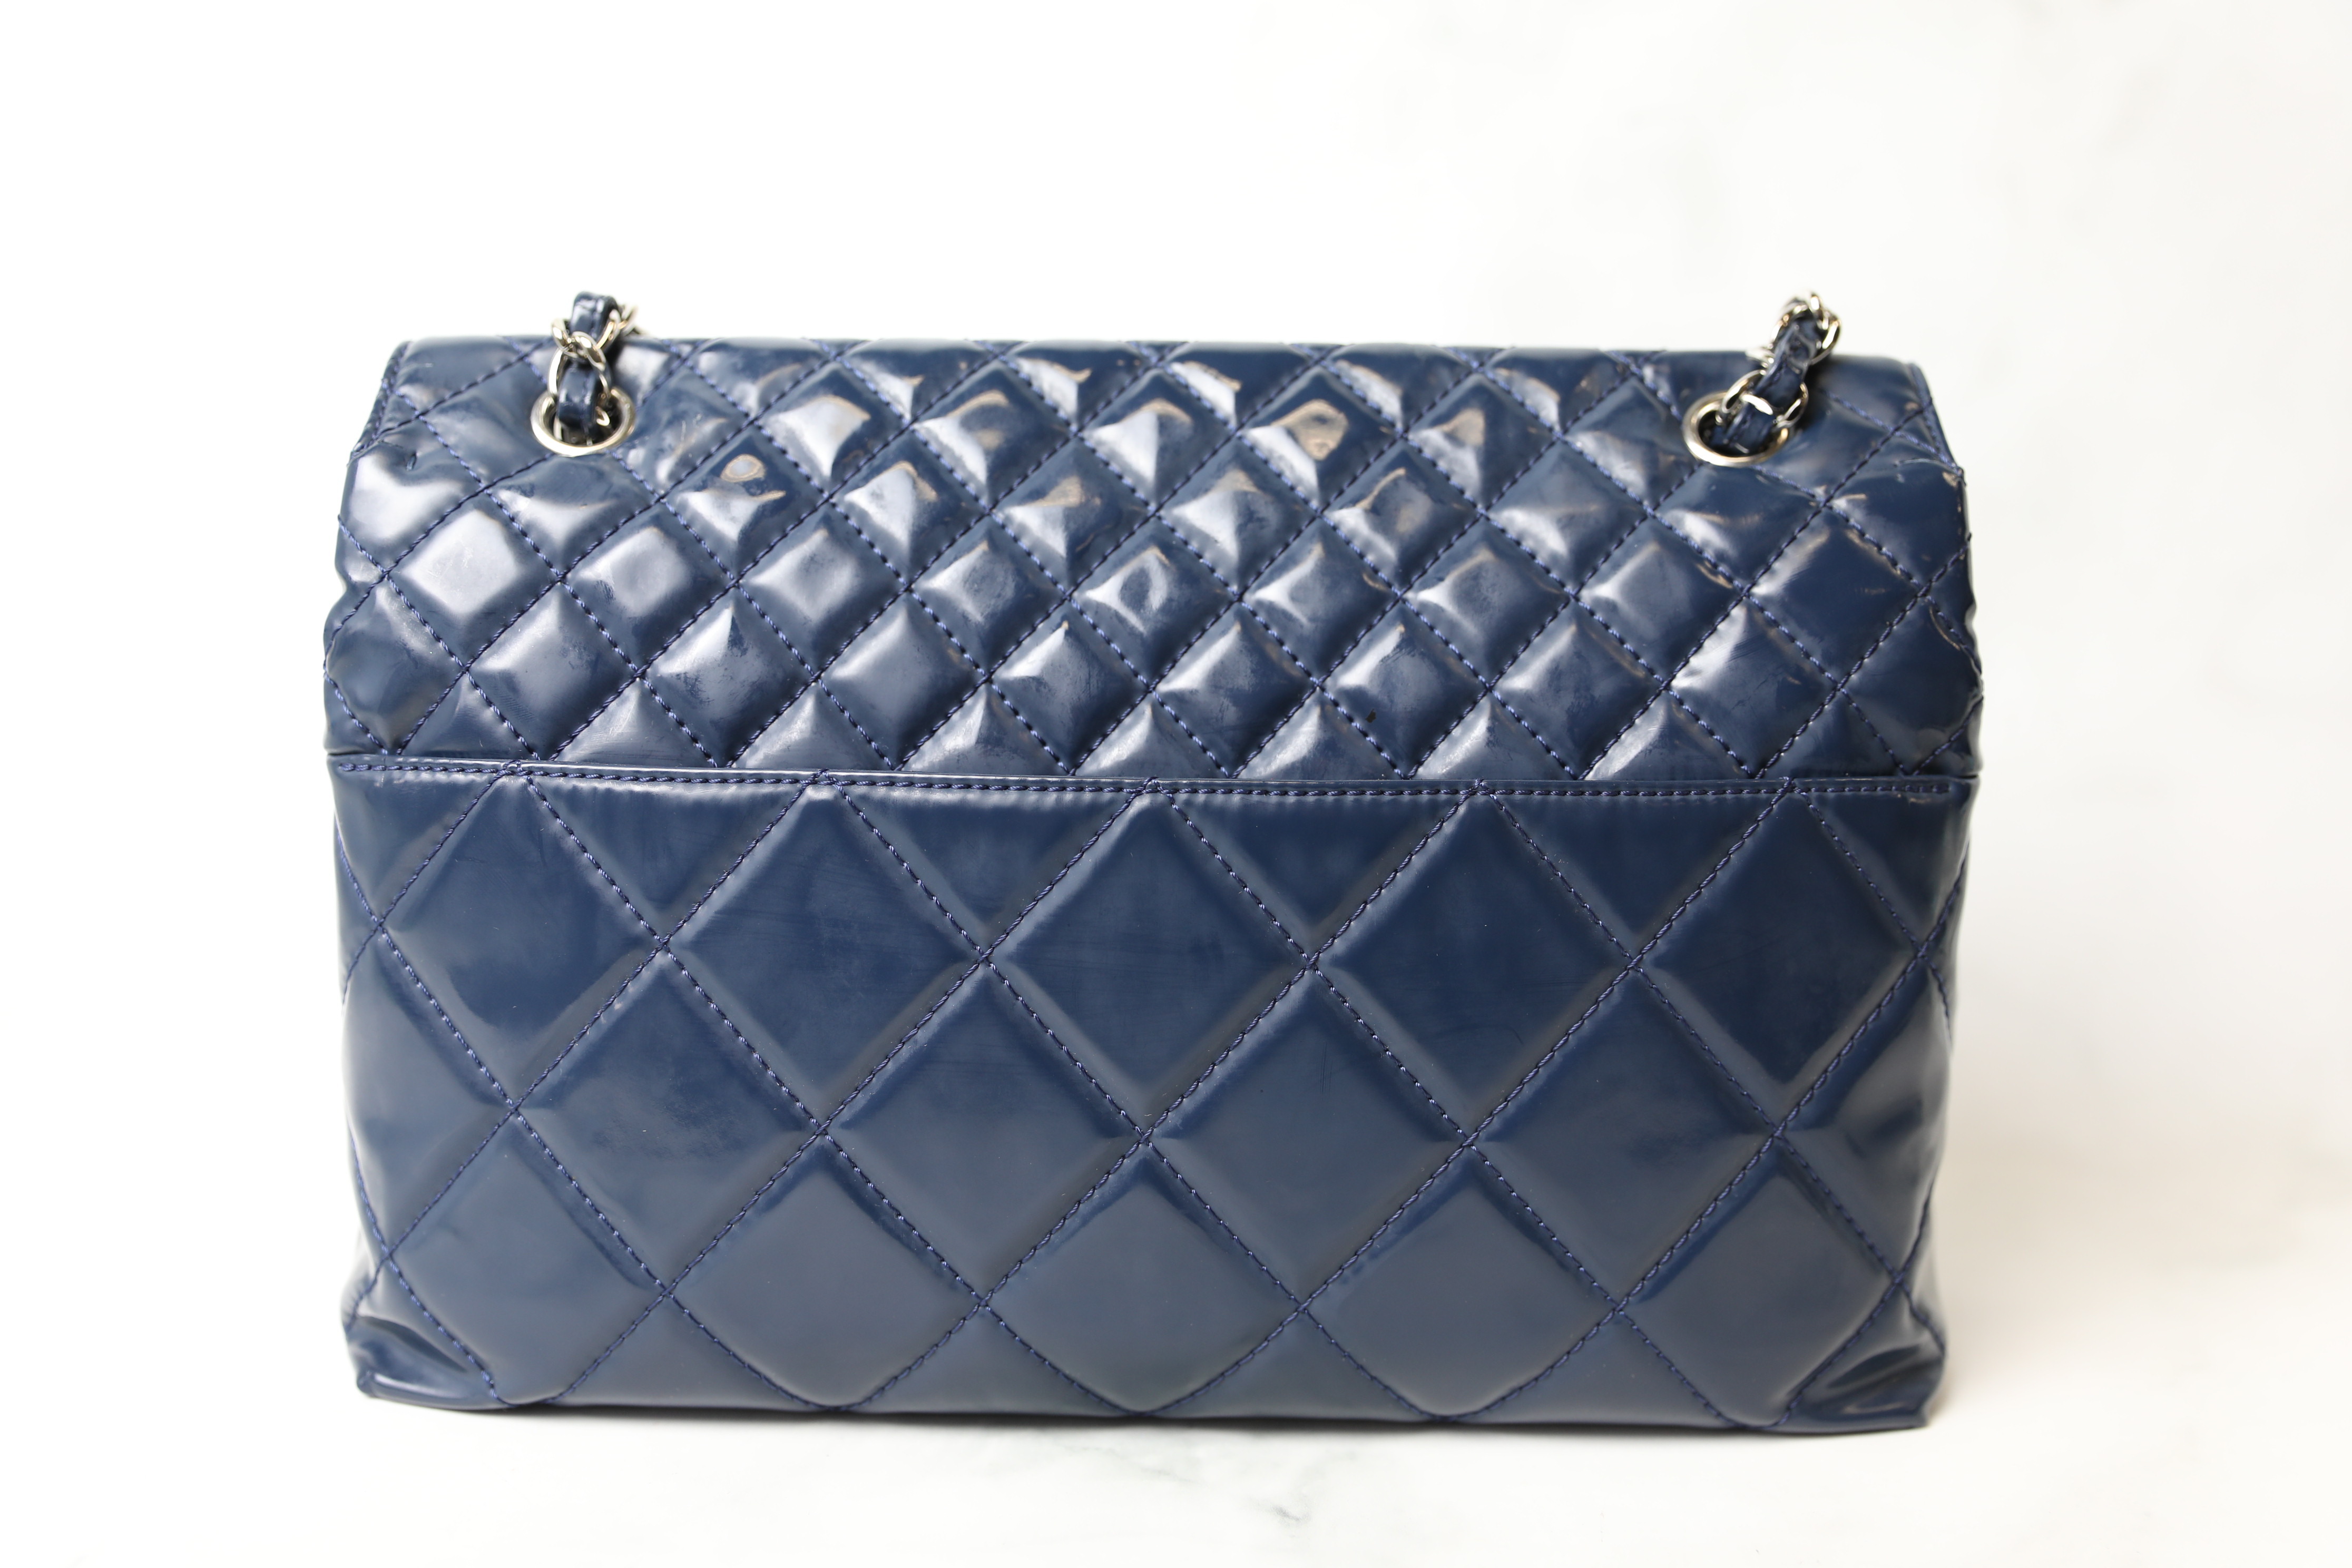 Chanel Large Flap Bag, Navy Patent with Silver Hardware, Preowned in  Dustbag WA001 - Julia Rose Boston